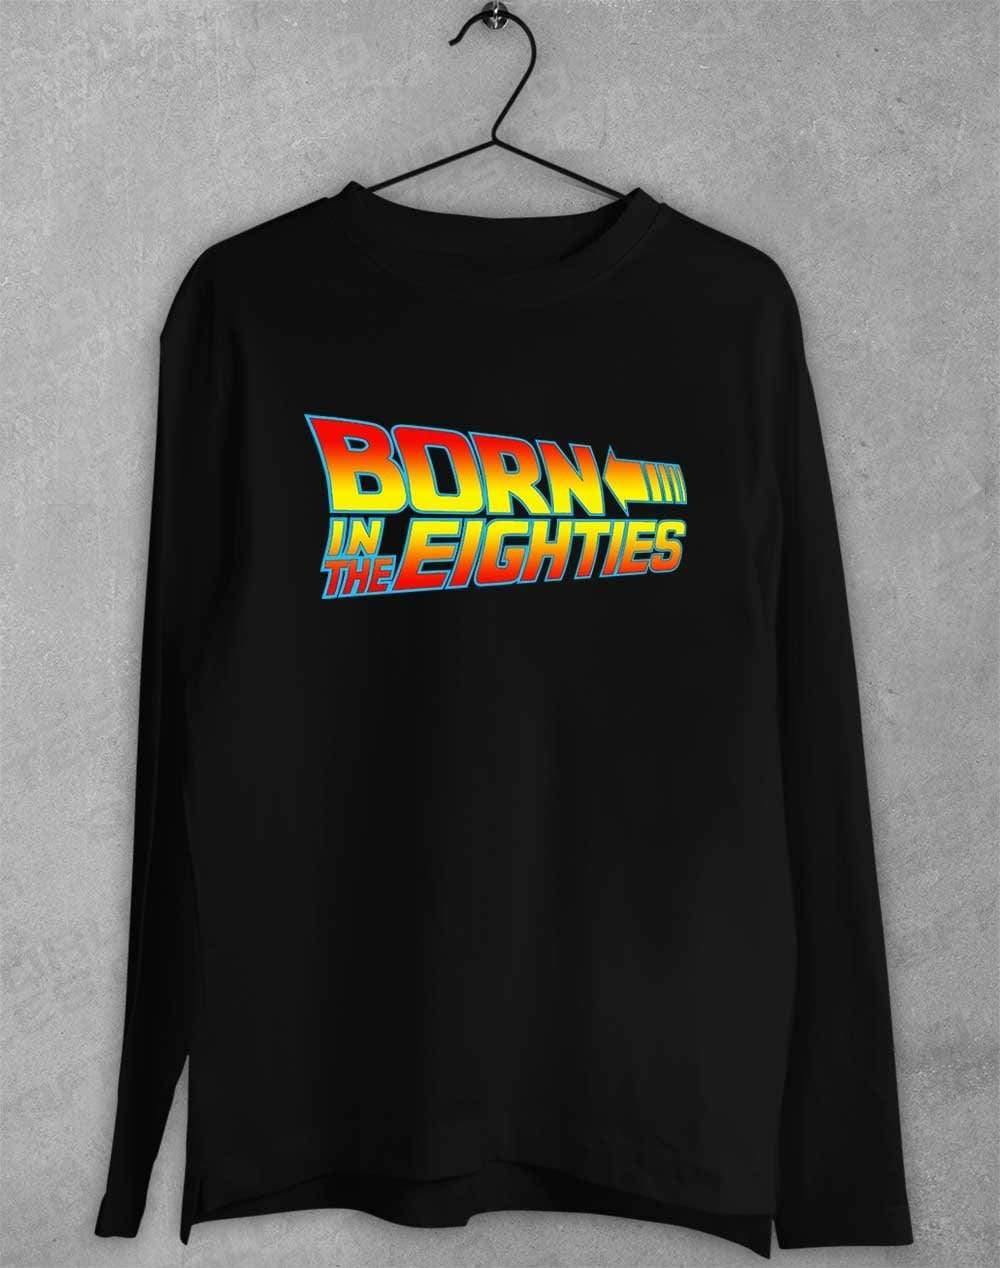 Born in the... (CHOOSE YOUR DECADE!) Long Sleeve T-Shirt 1980s - Black / S  - Off World Tees